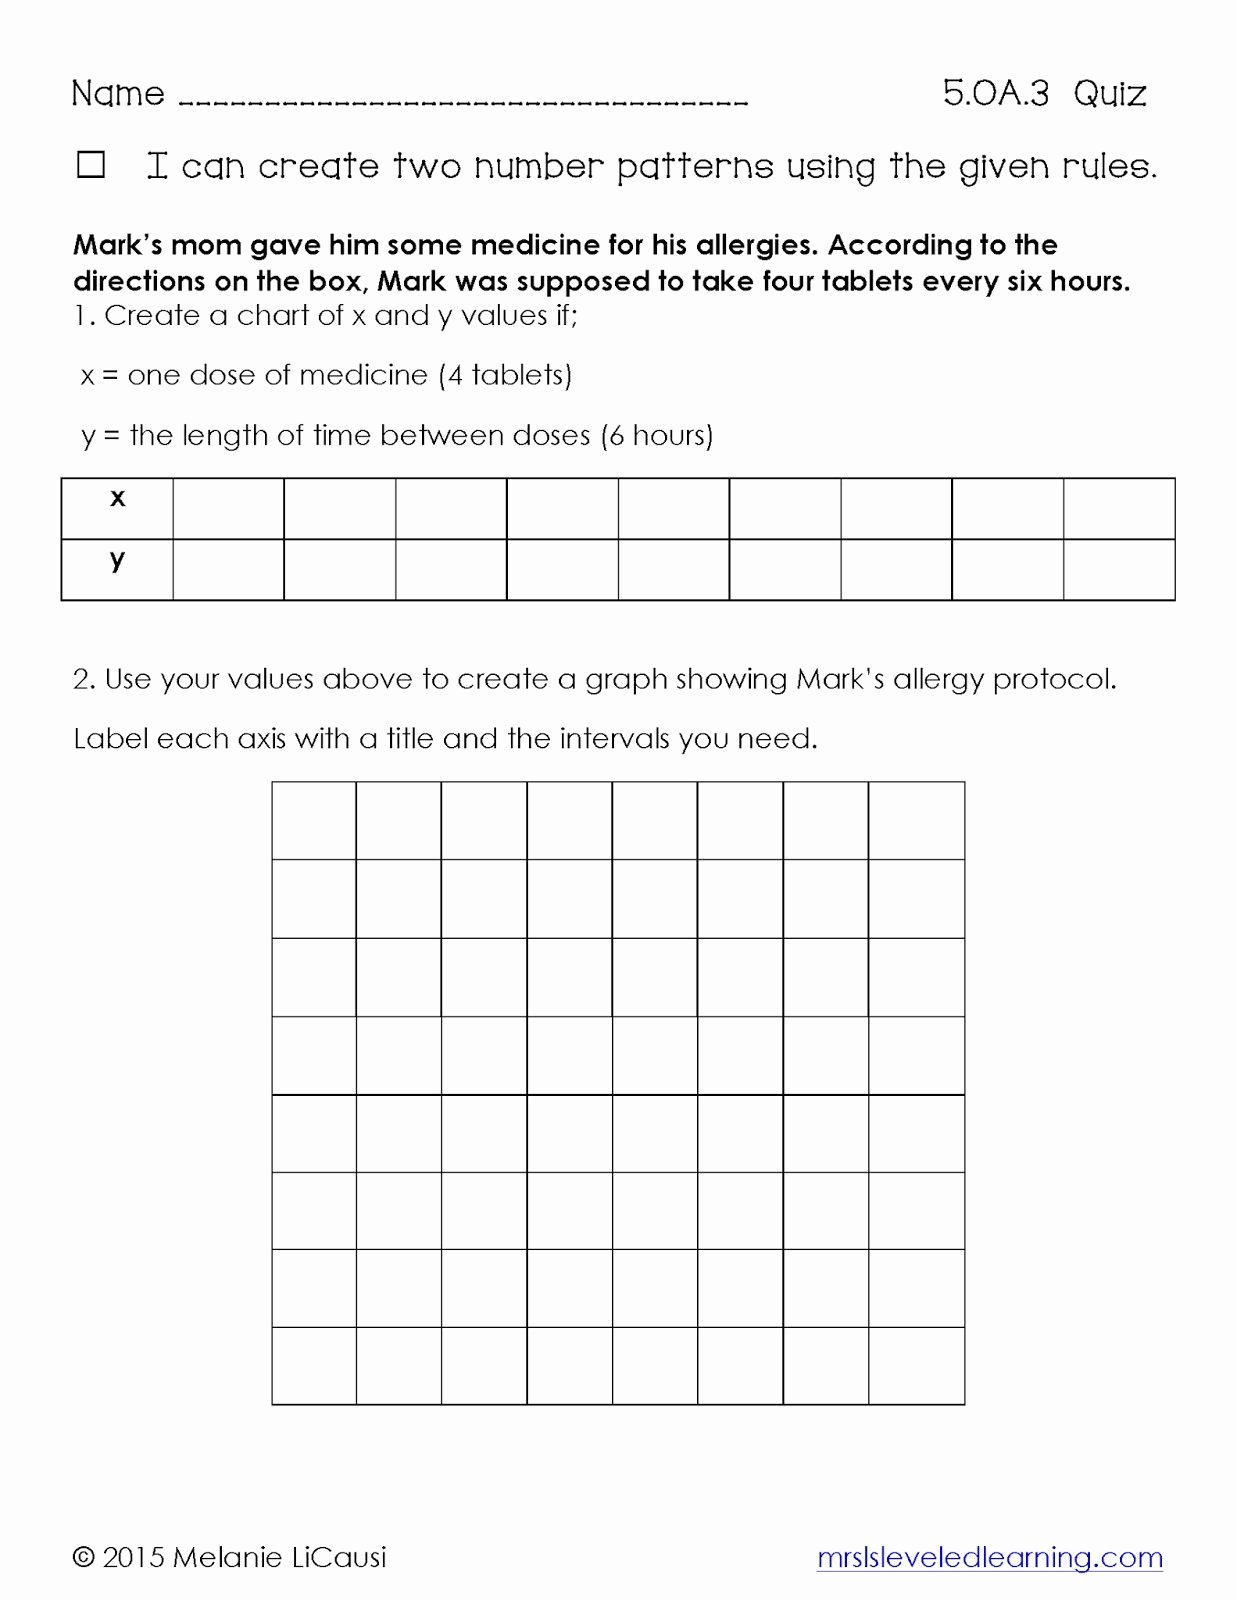 Ecological Relationships Worksheet Answers Lovely Ecological Relationships Worksheet Answers Geo